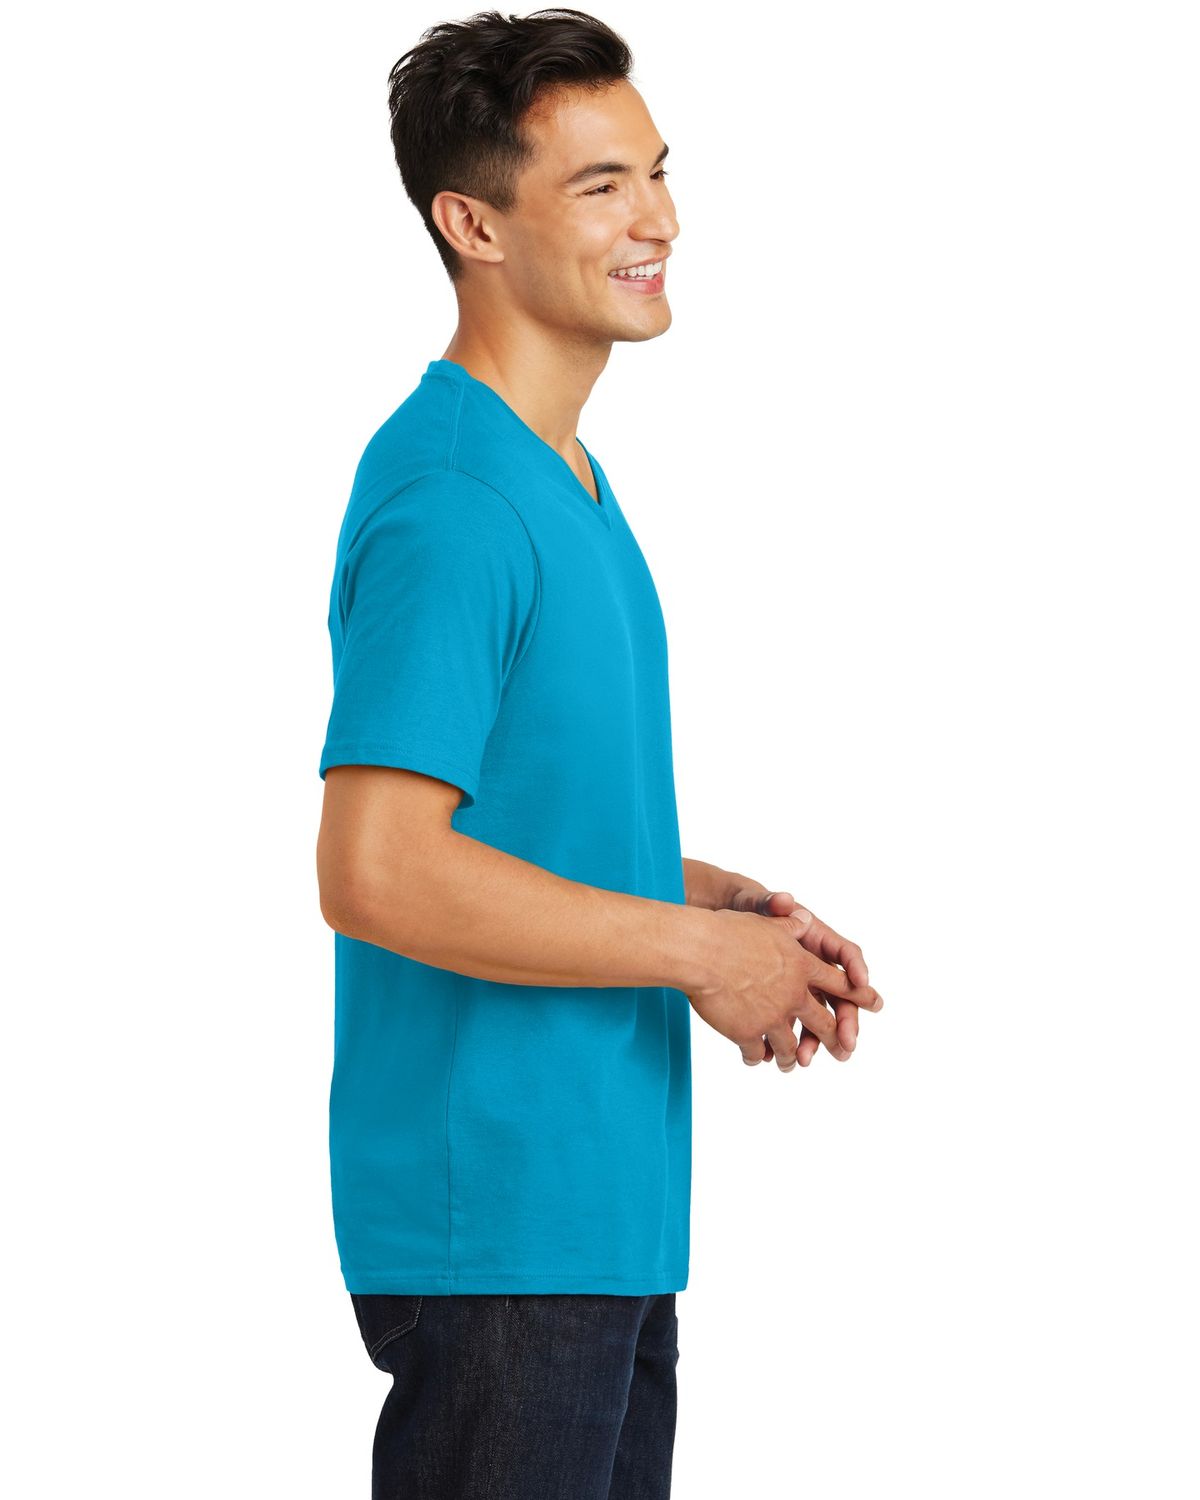 'District DT1170 Mens Perfect Weight V-Neck Tee'